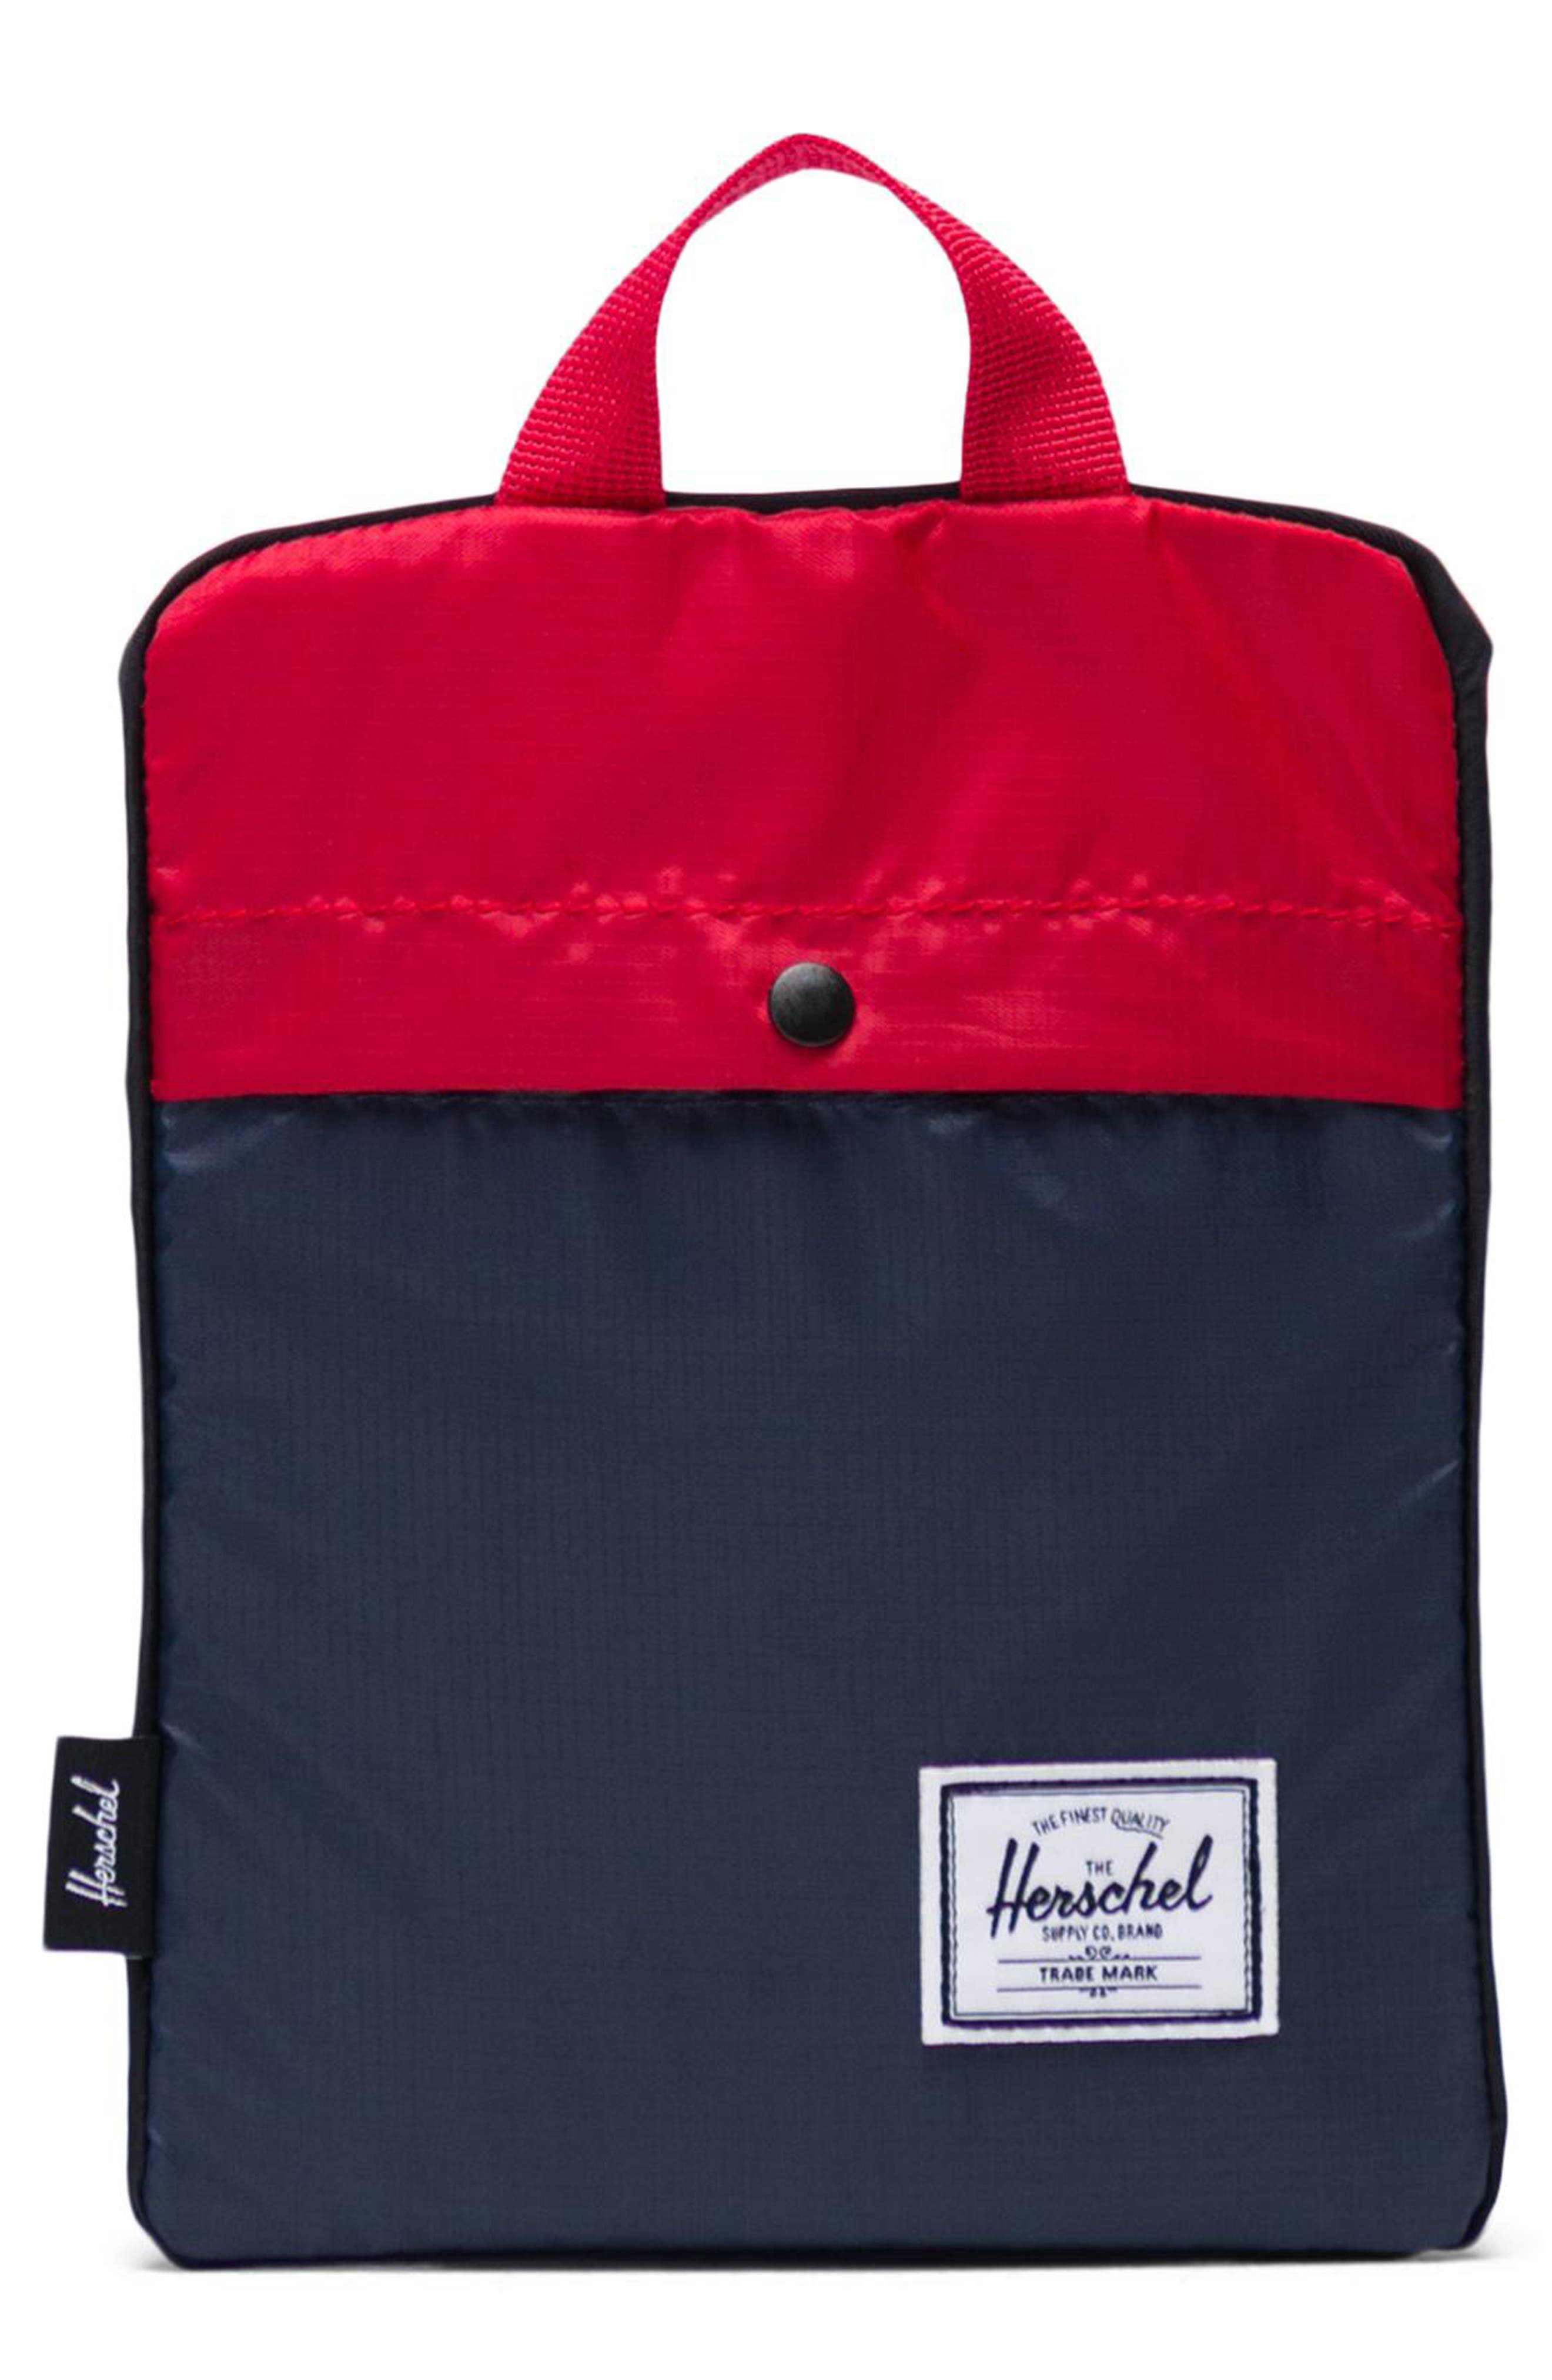 Herschel Supply Co Packable Duffle Bag In Navy/red Leather